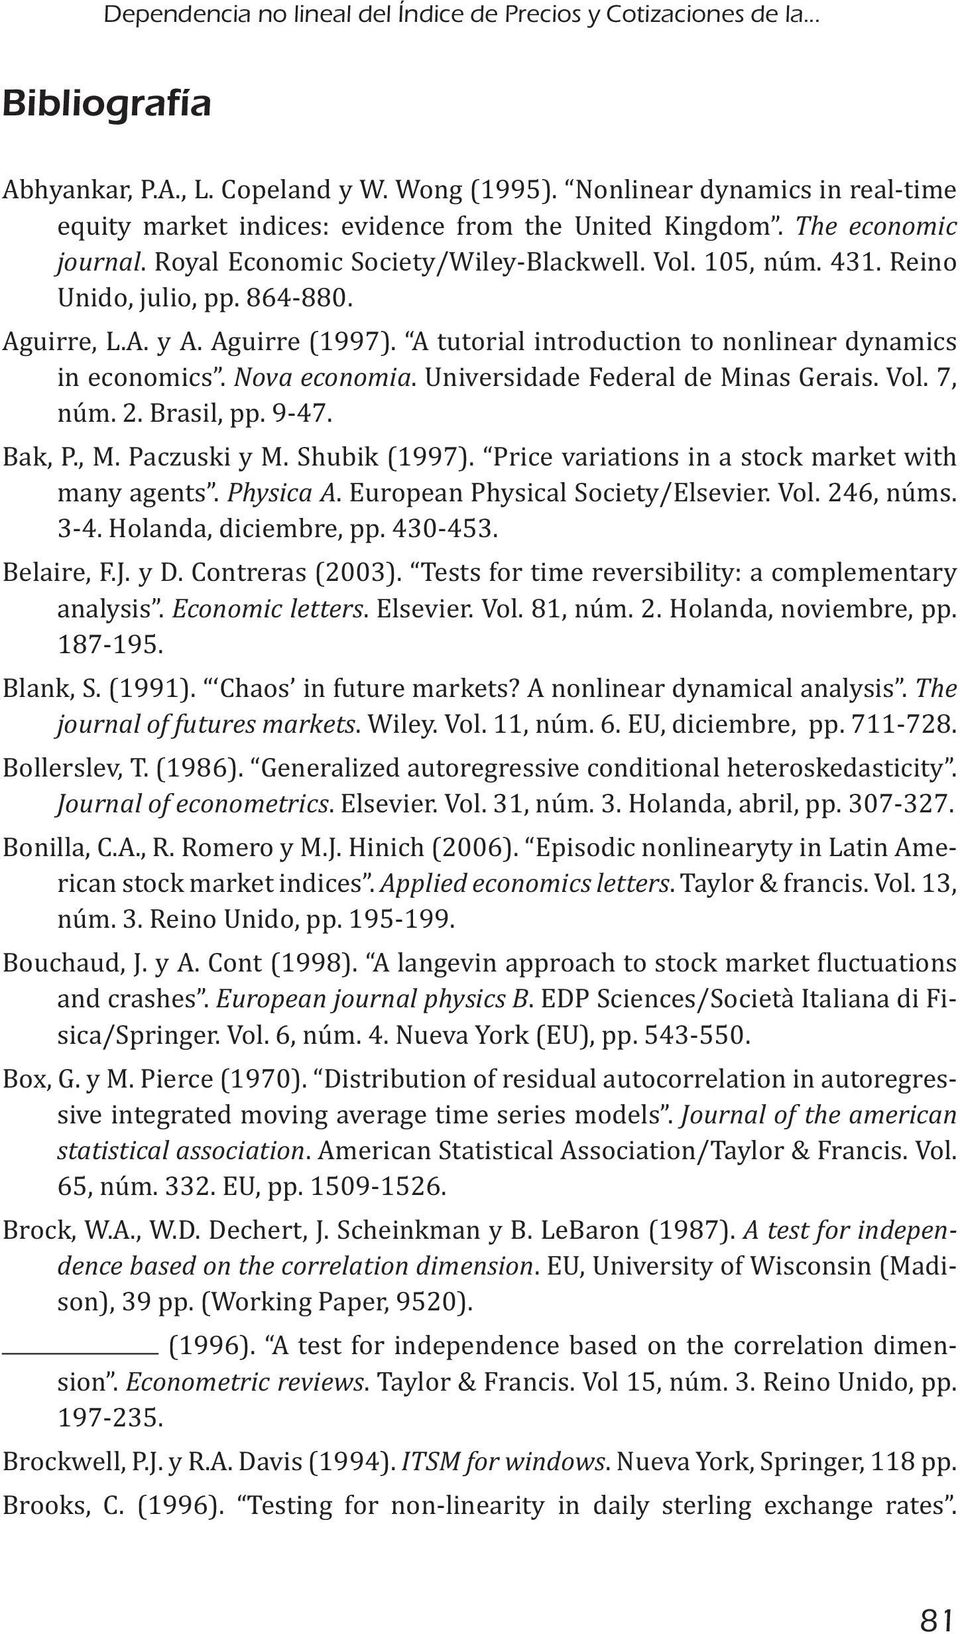 Economic letters The journal of futures markets Journal of econometrics - Applied economics letters and crashes.